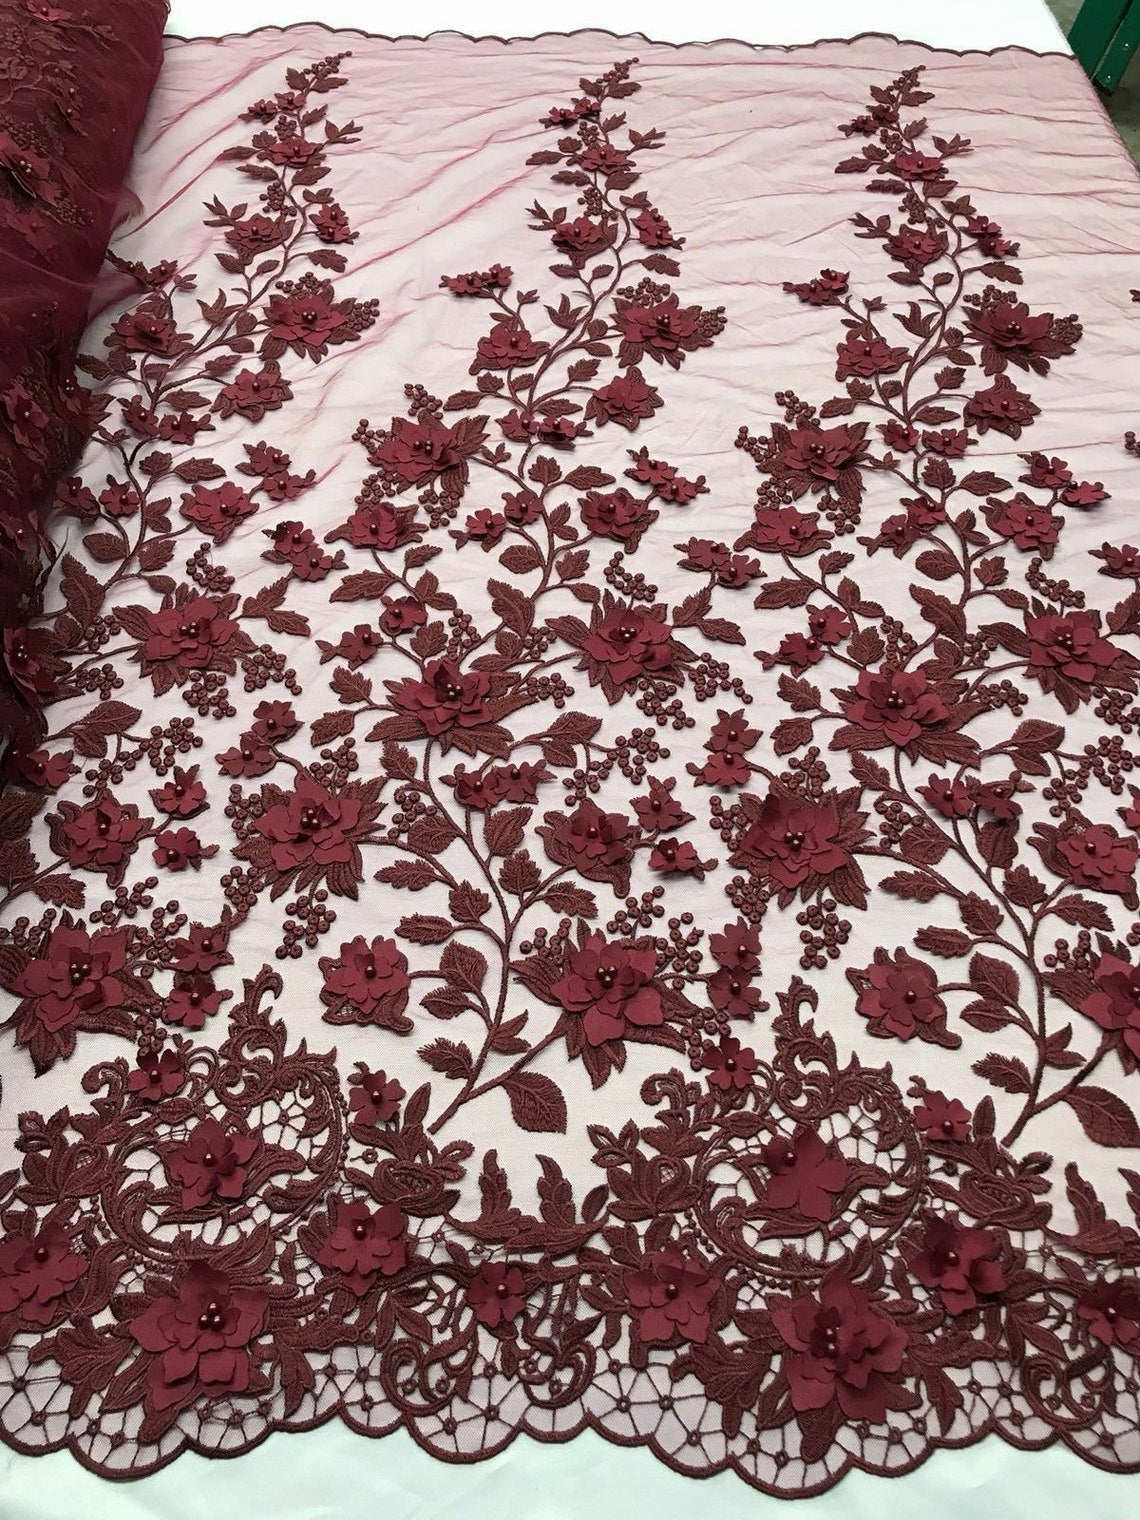 3D Floral Princess Fabric - Burgundy - Embroidered Floral Lace Fabric with 3D Flowers By Yard